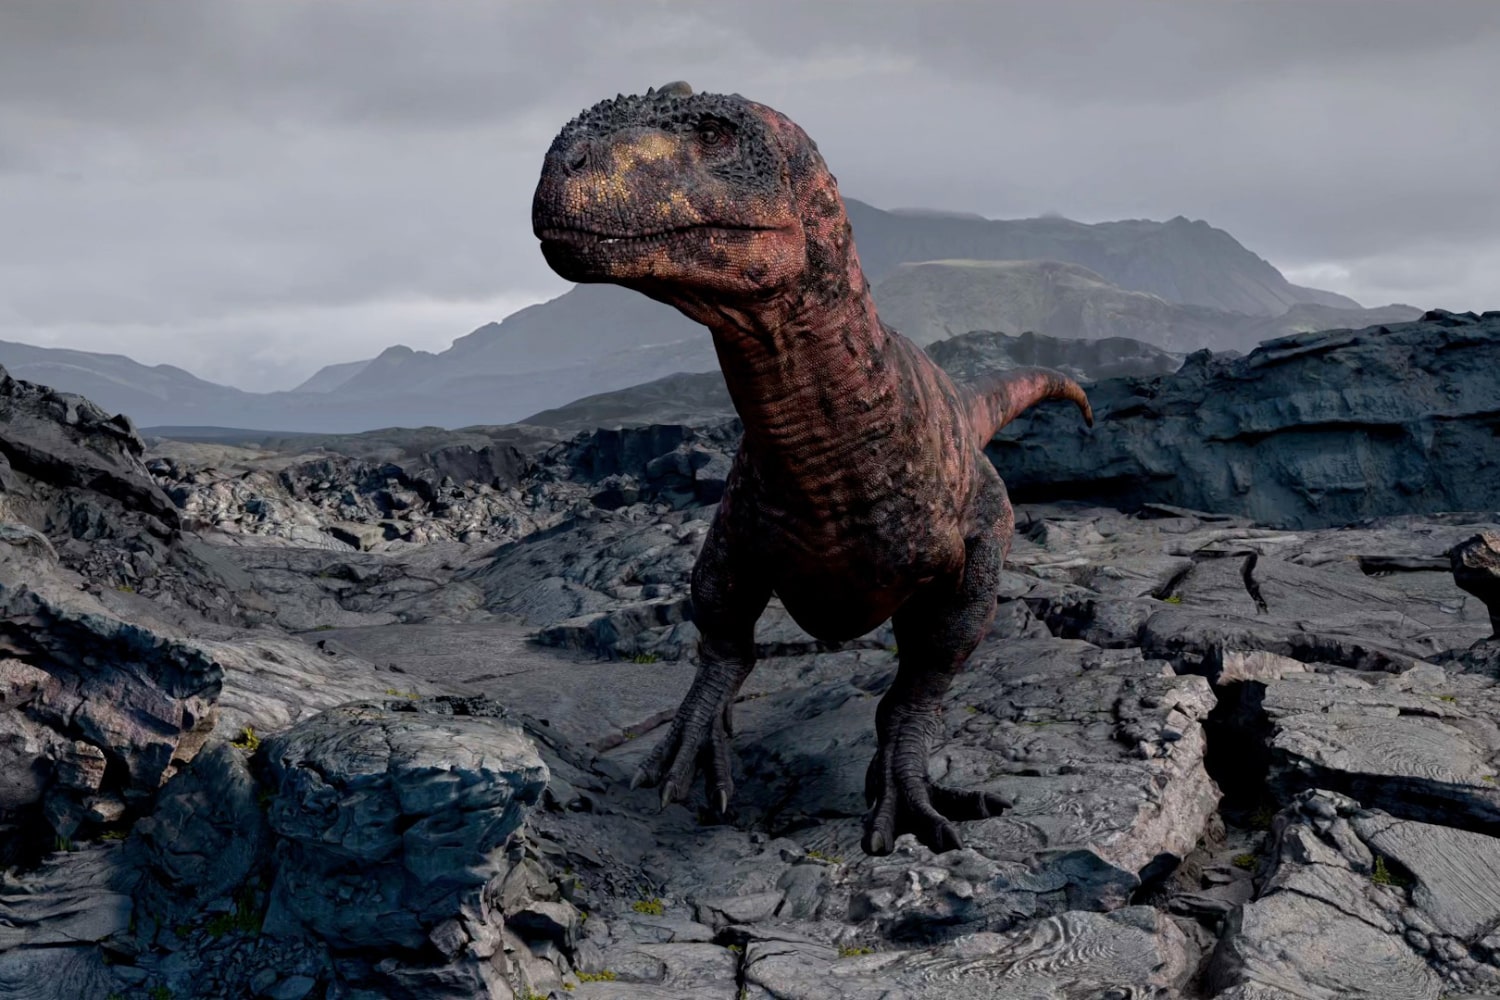 A virtual reality dinosaur is rendered using the Encounter Dinosaurs app on the Apple Vision Pro headset.